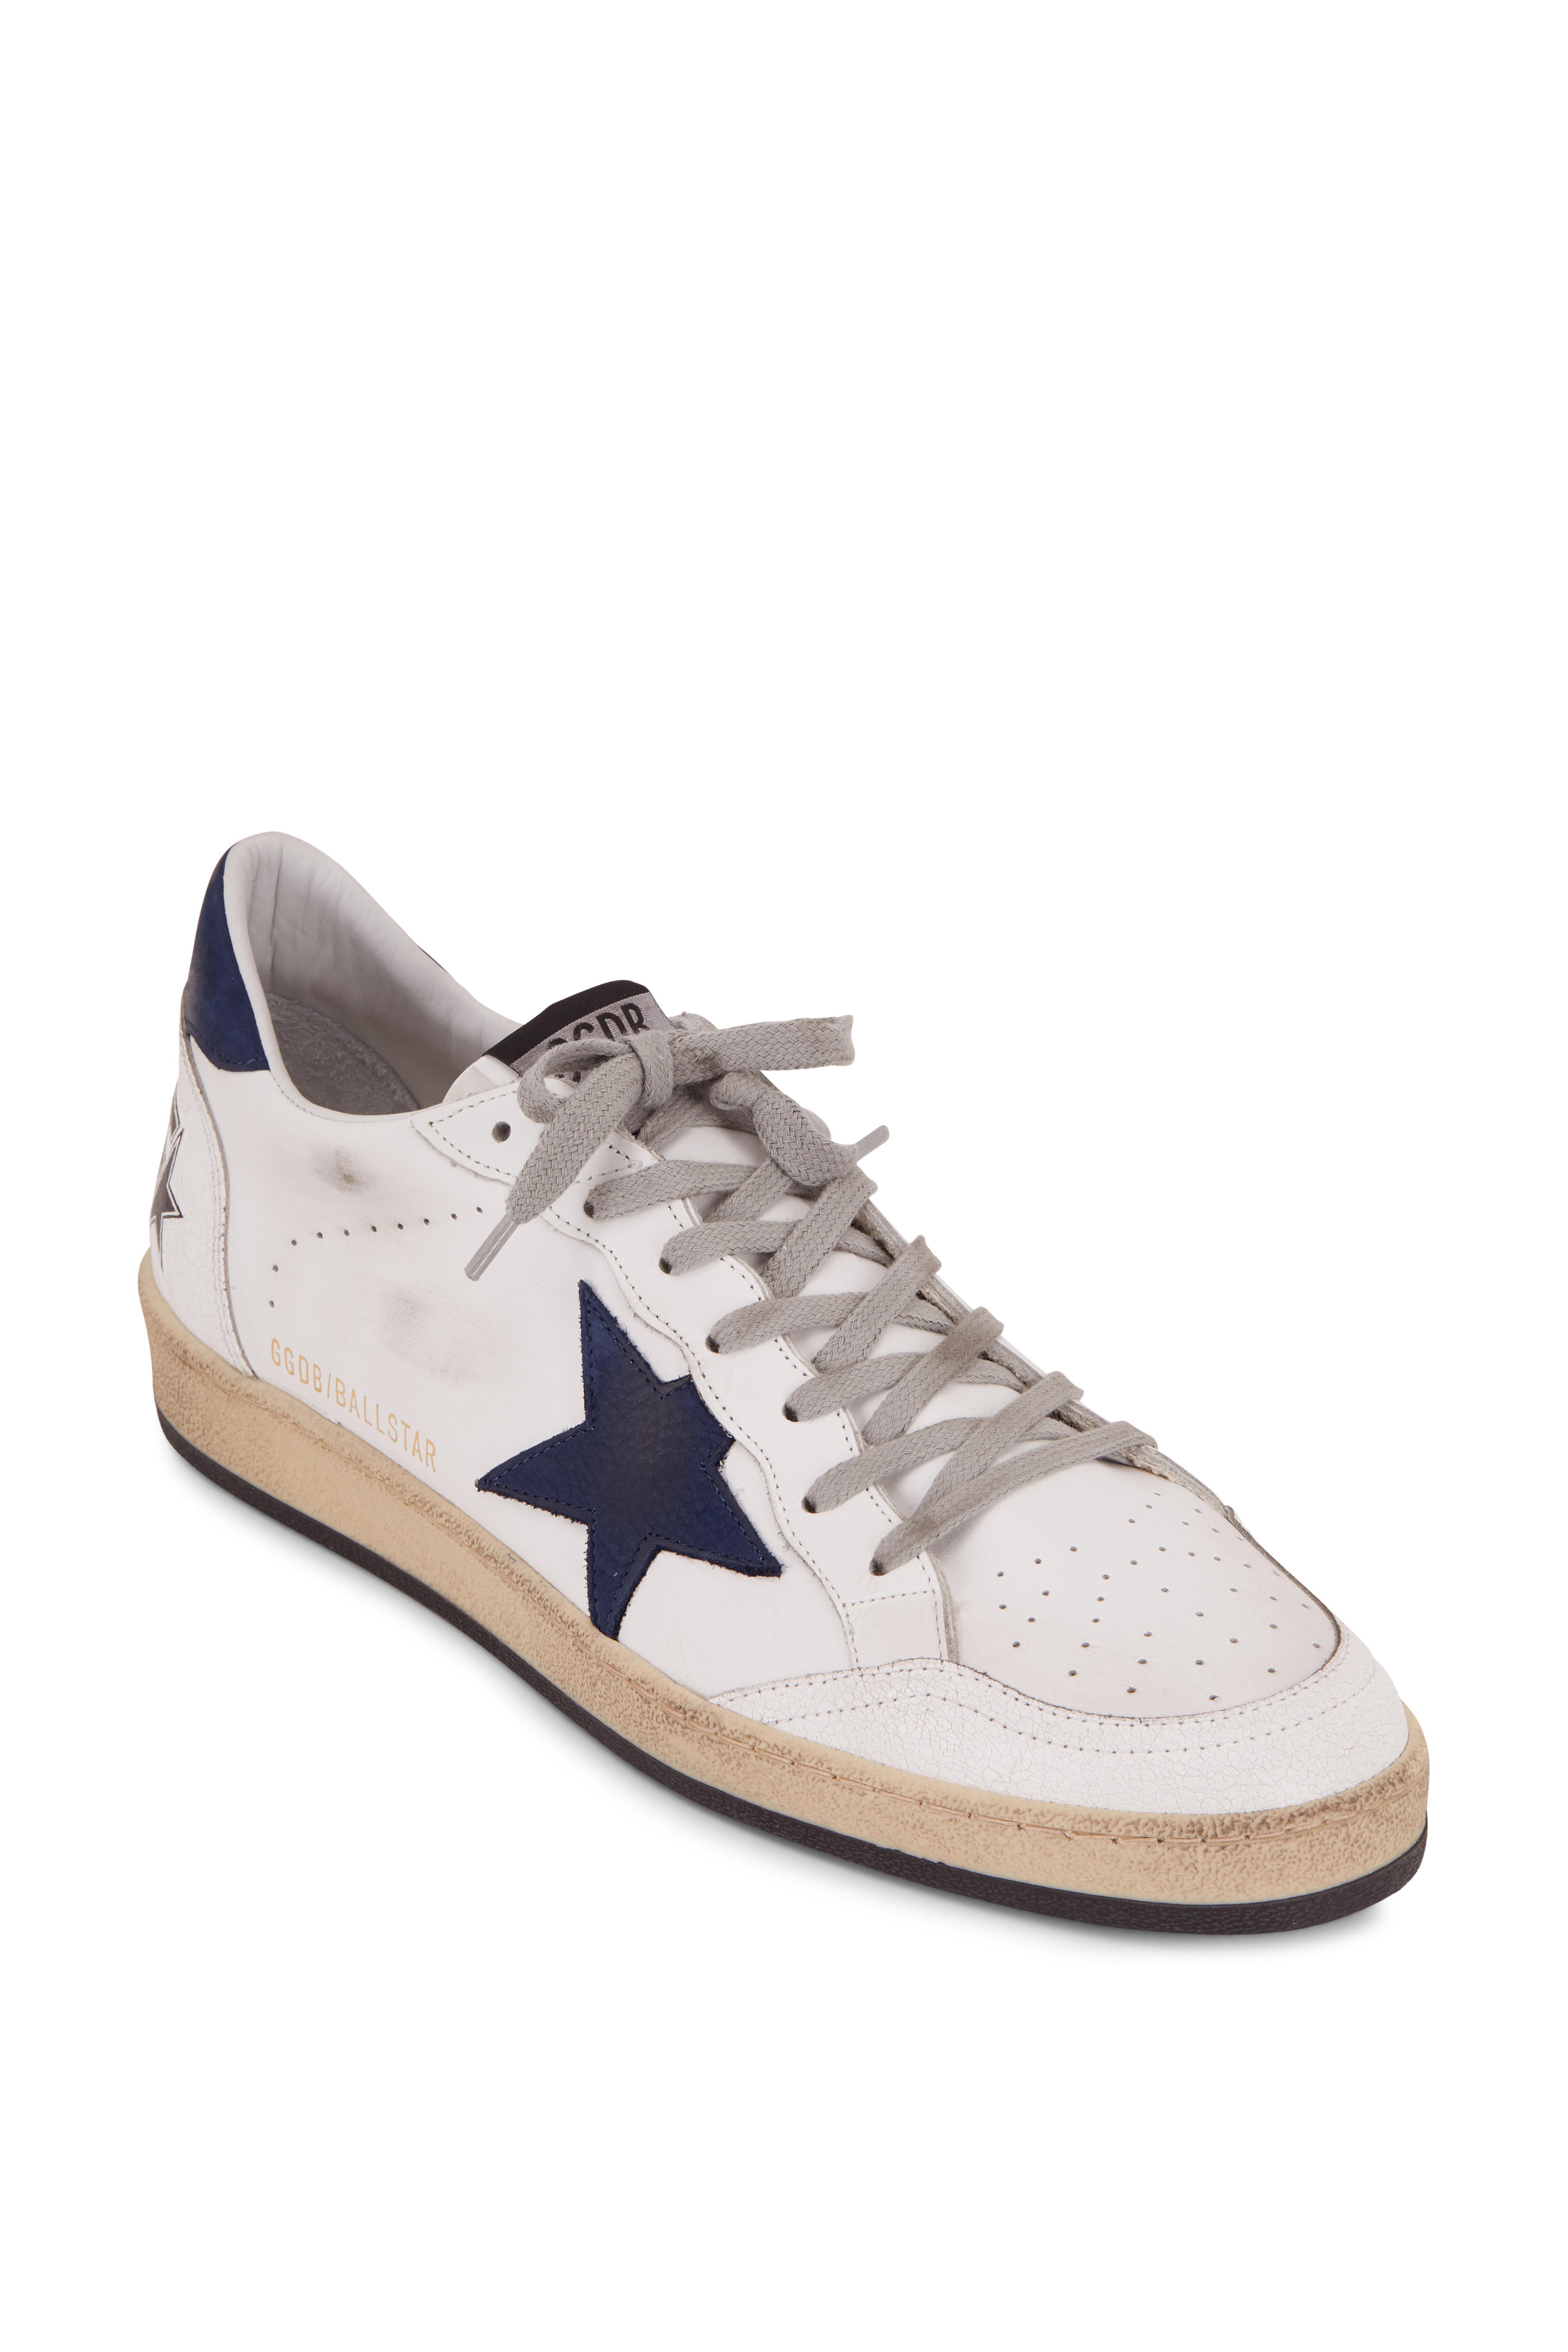 golden goose white leather blue suede